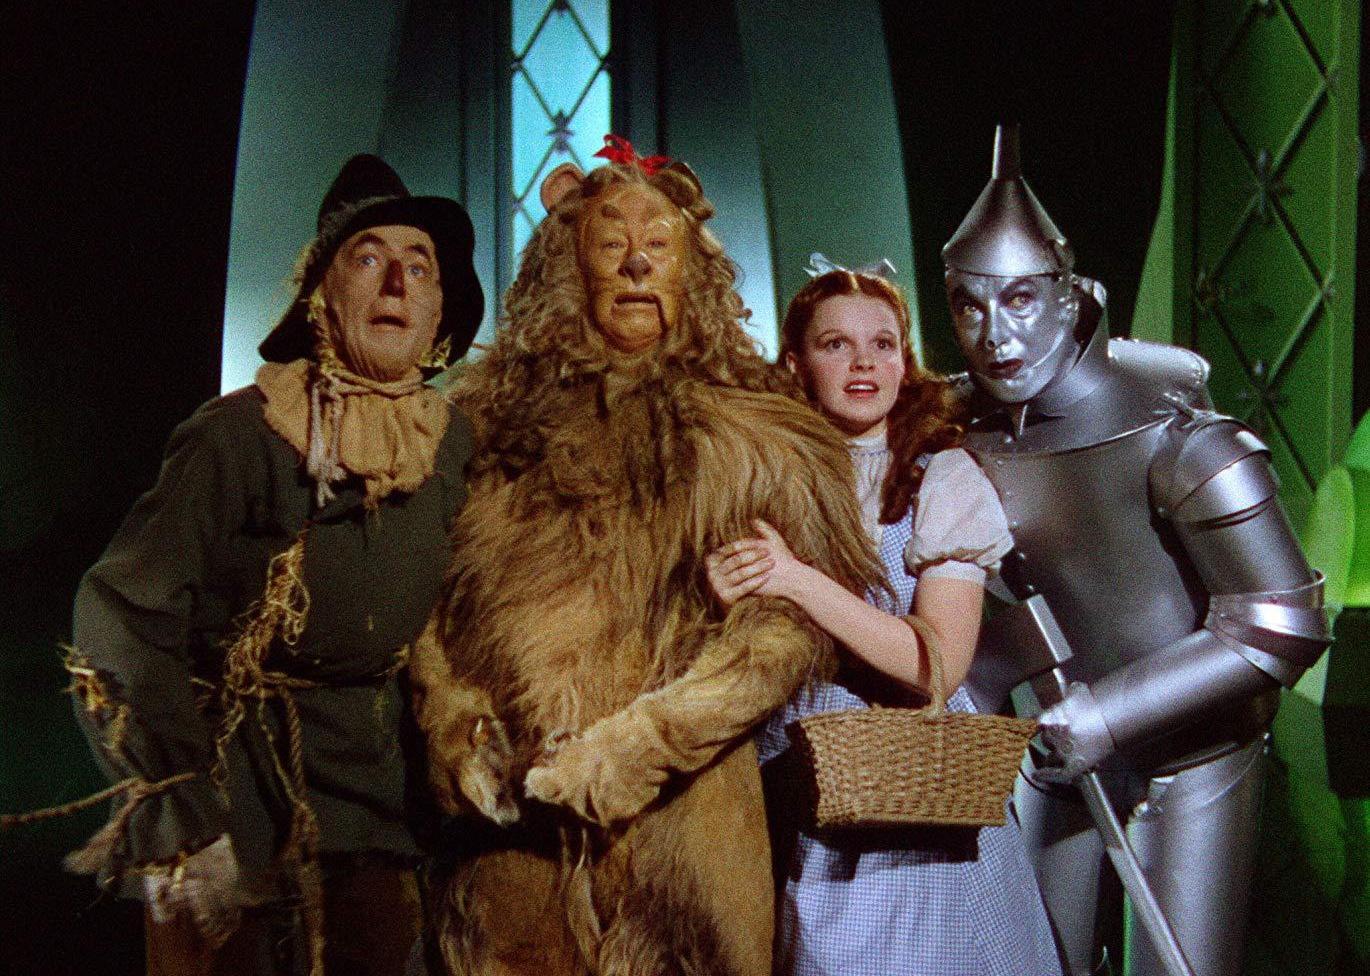 The scarecrow, lion, tinman and Judy Garland as Dorothy looking scared.